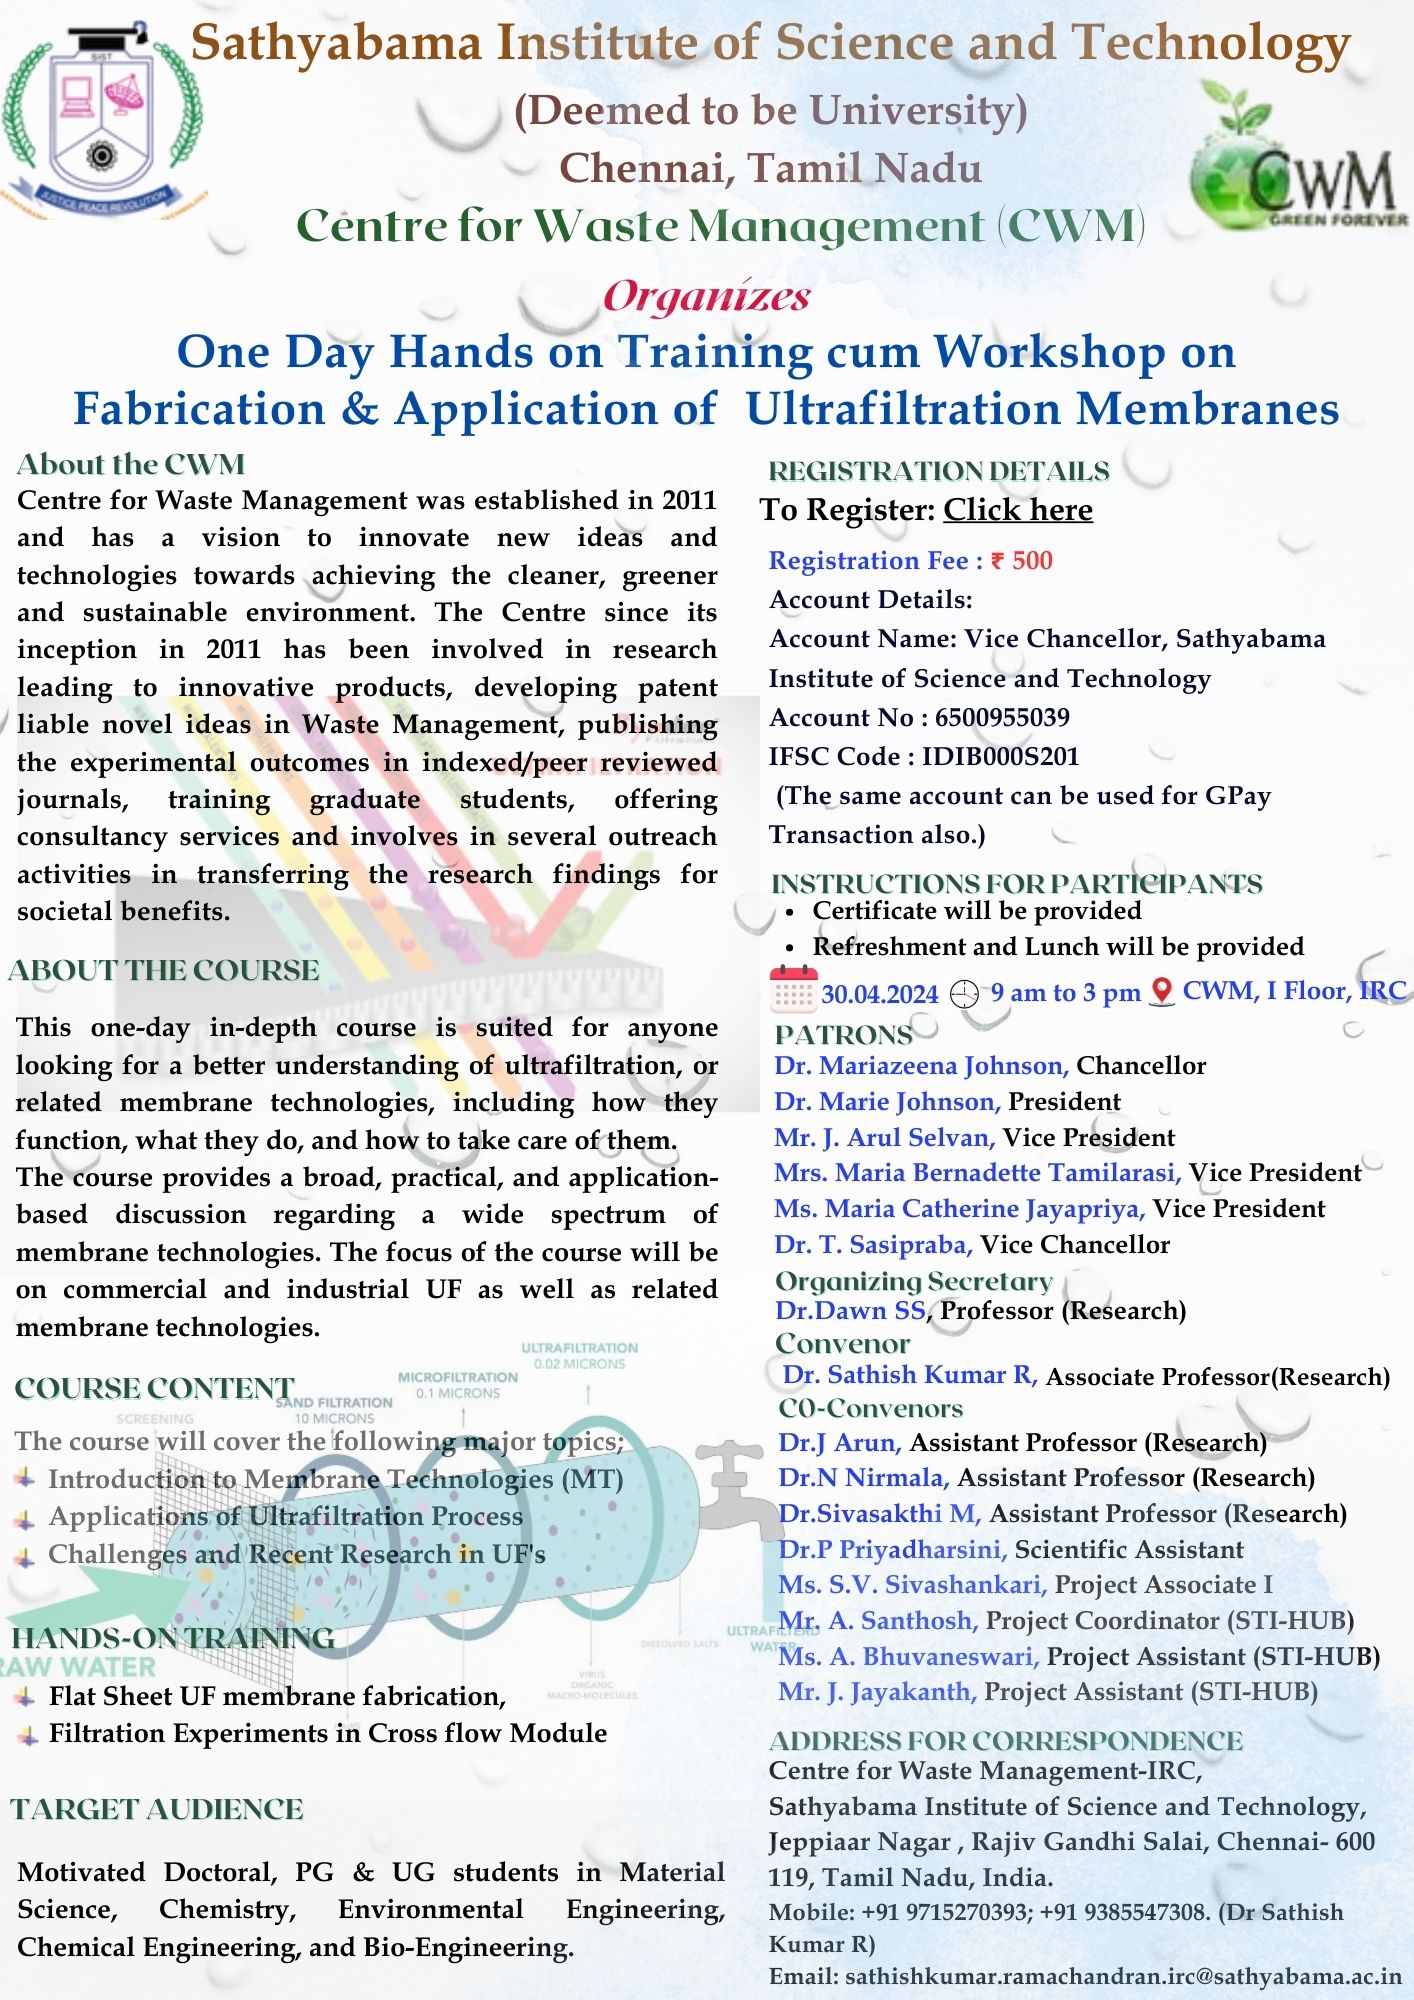 One Day Hands on Training cum Workshop on Fabrication & Application of Ultrafiltration Membranes 2024